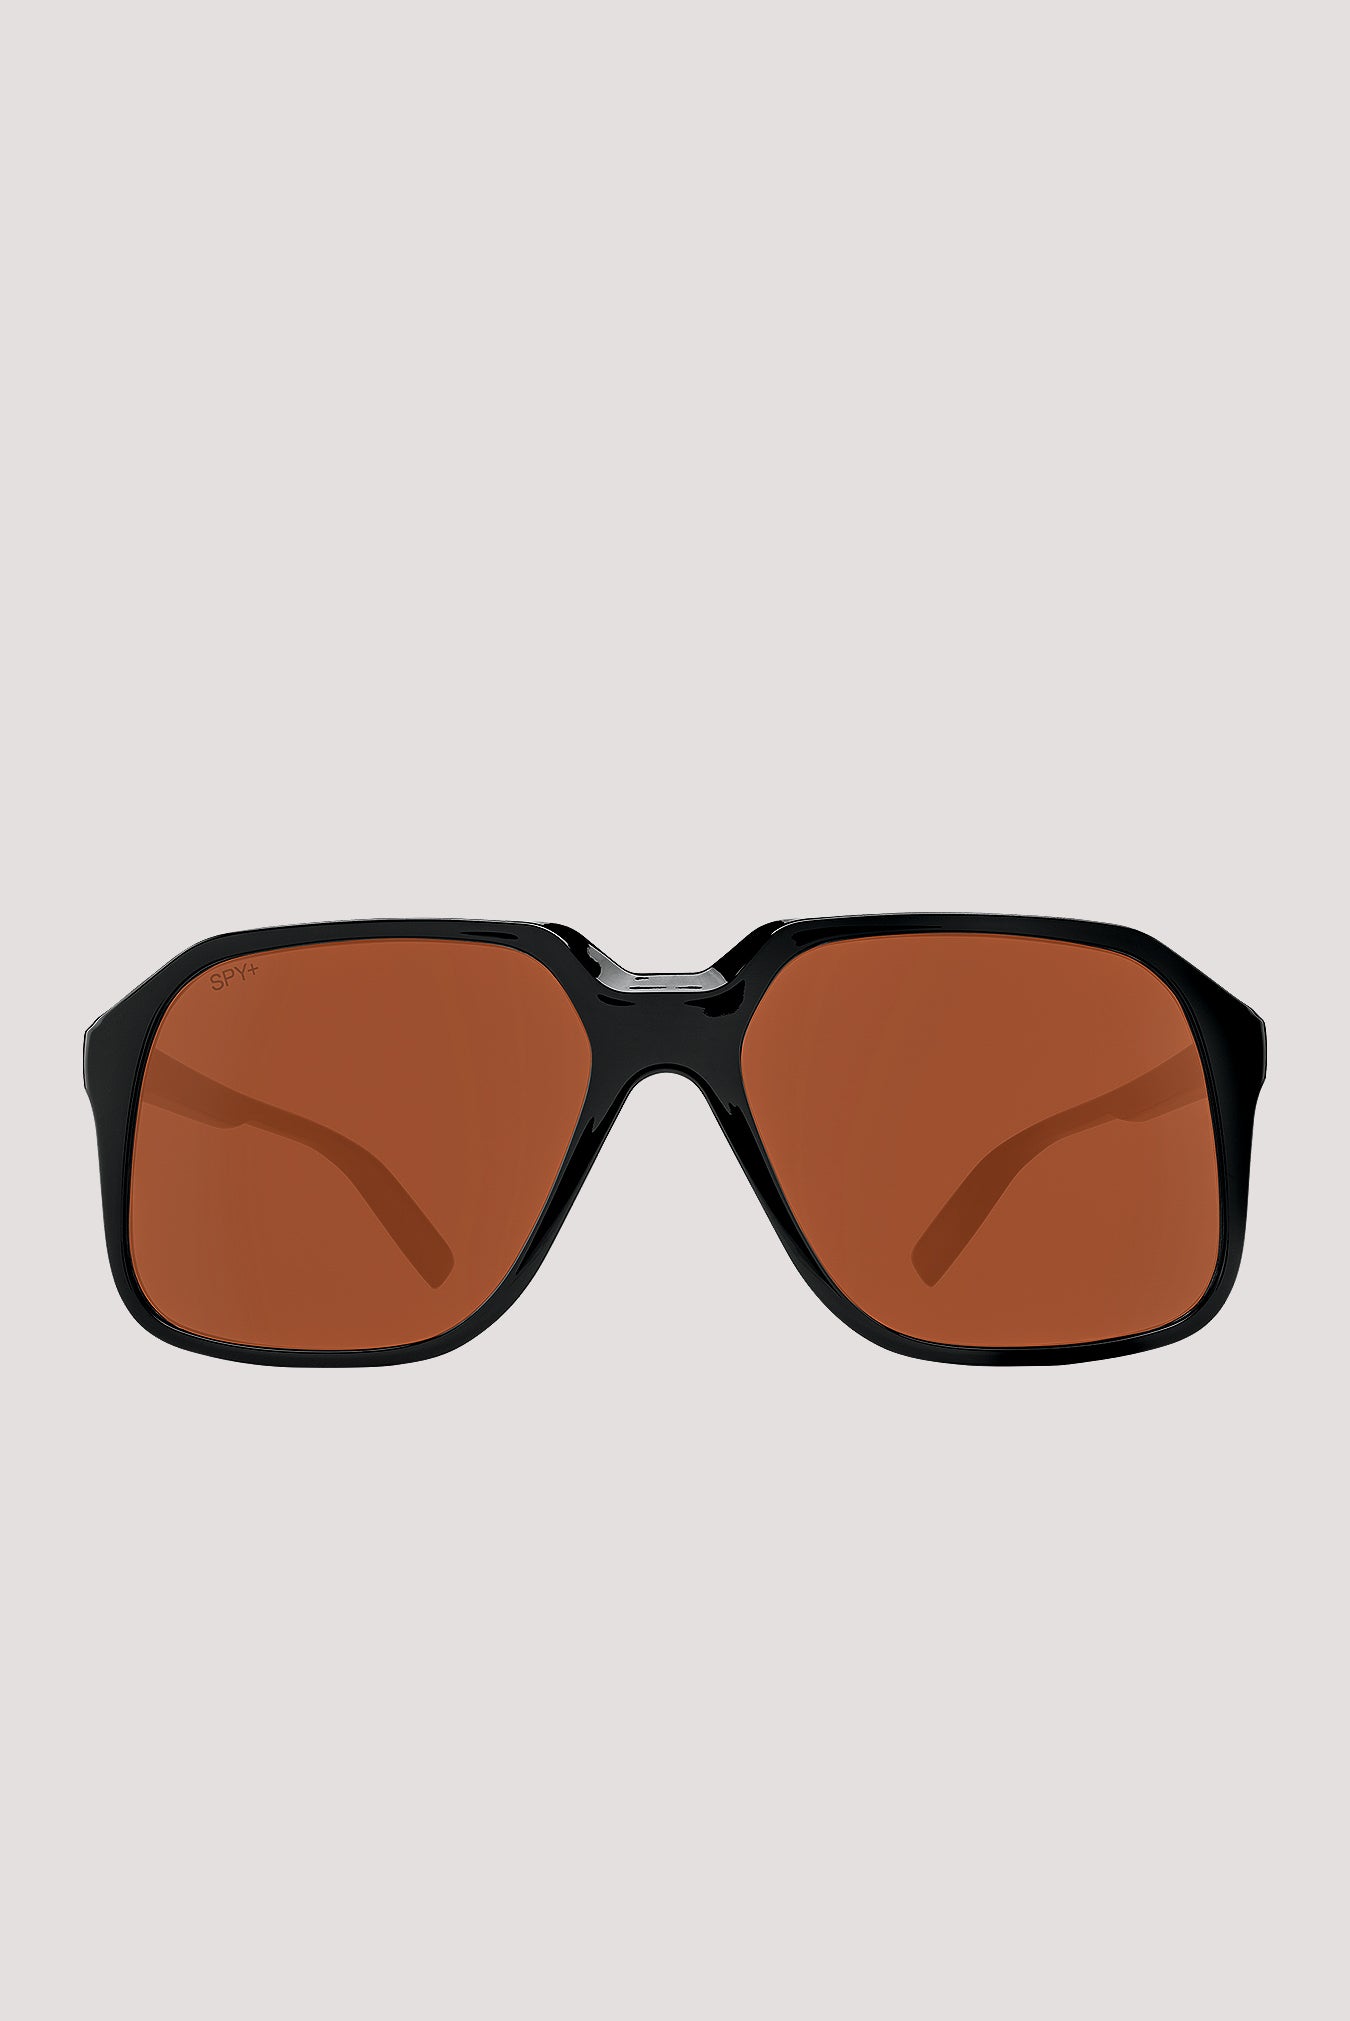 Men's Full Coverage 62mm Daily Shades - Sunglass Spot